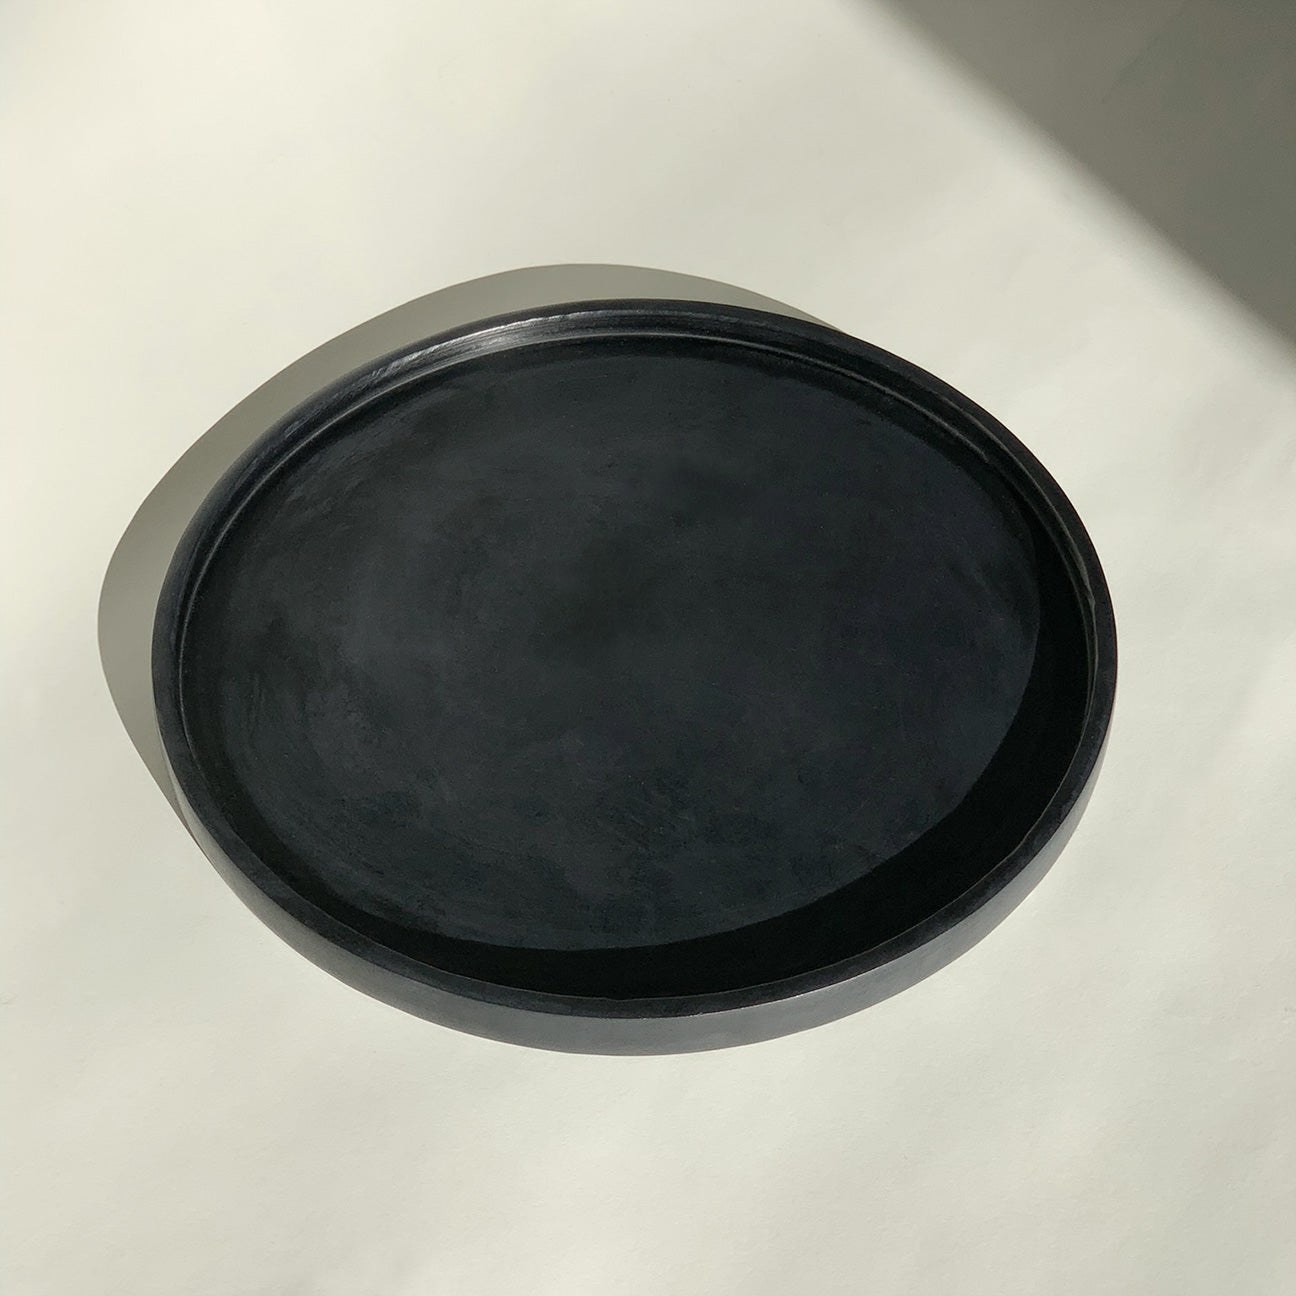 Image of M+A Soapstone Round Tray in black